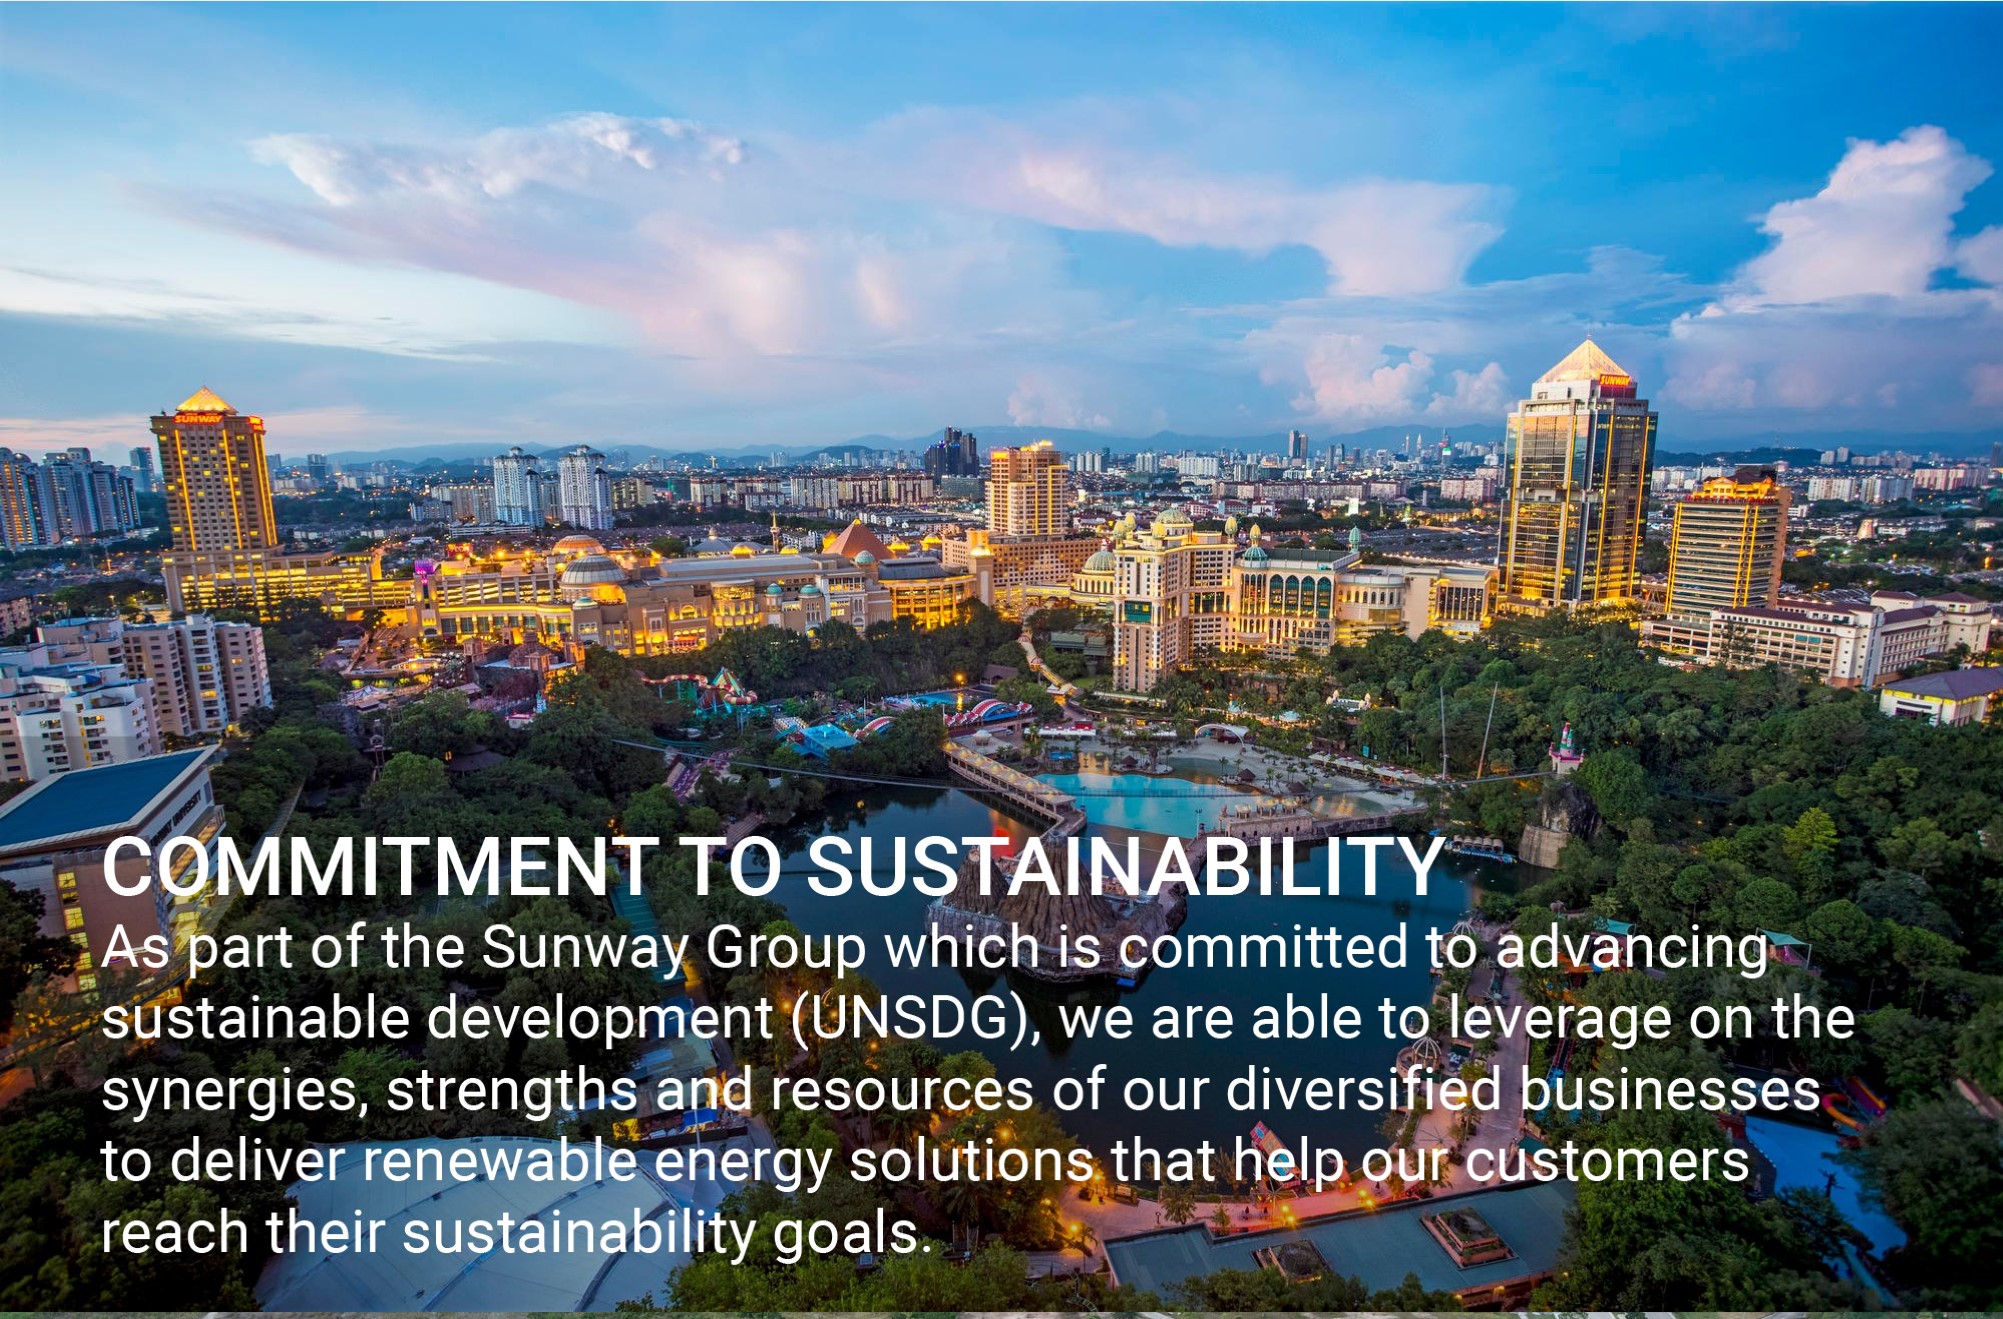 As part of the Sunway Group which is committed to advancing sustainable development (UNSDG), we are able to leverage on the synergies, strengths and resources of our diversified businesses to deliver renewable energy solutions that help our customers reach their sustainability goals.